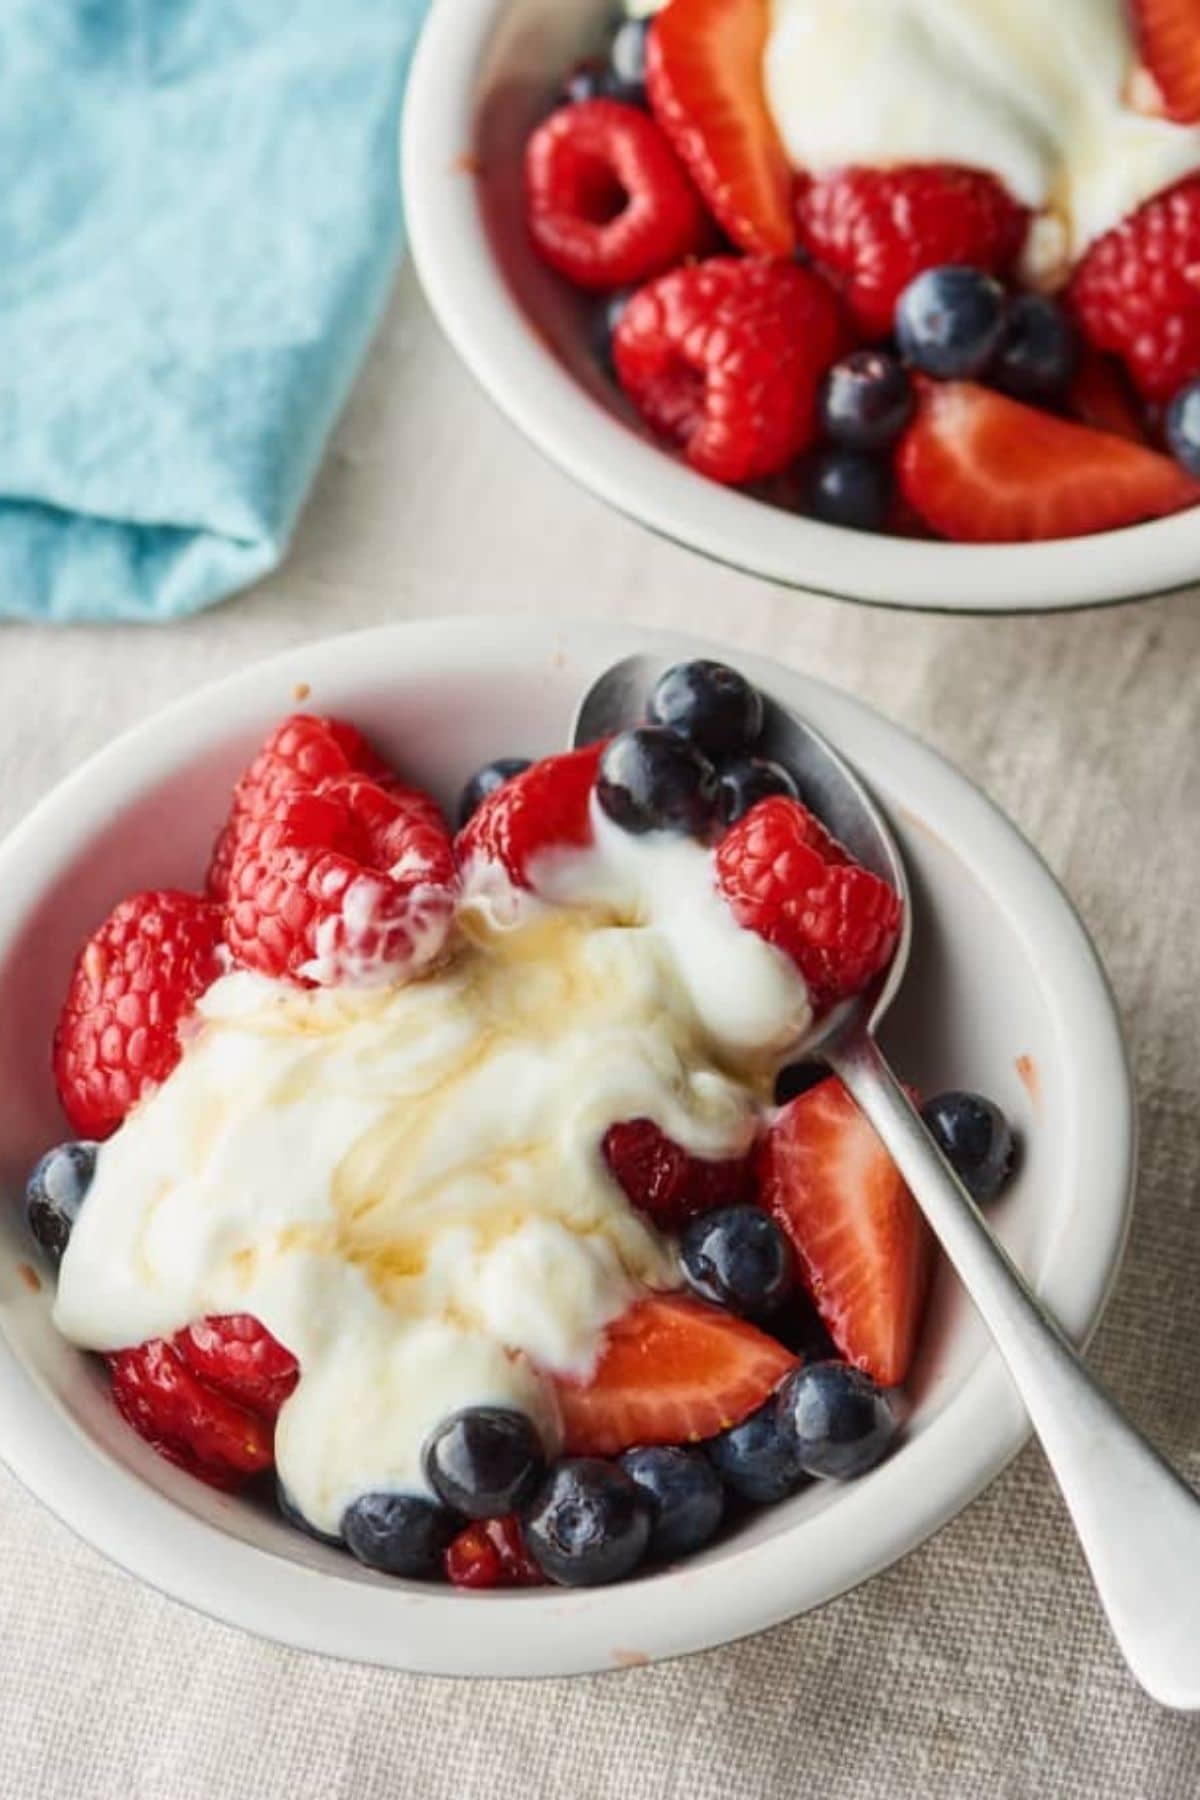 Small white bowl of mixed berries and yogurt by blue napkin